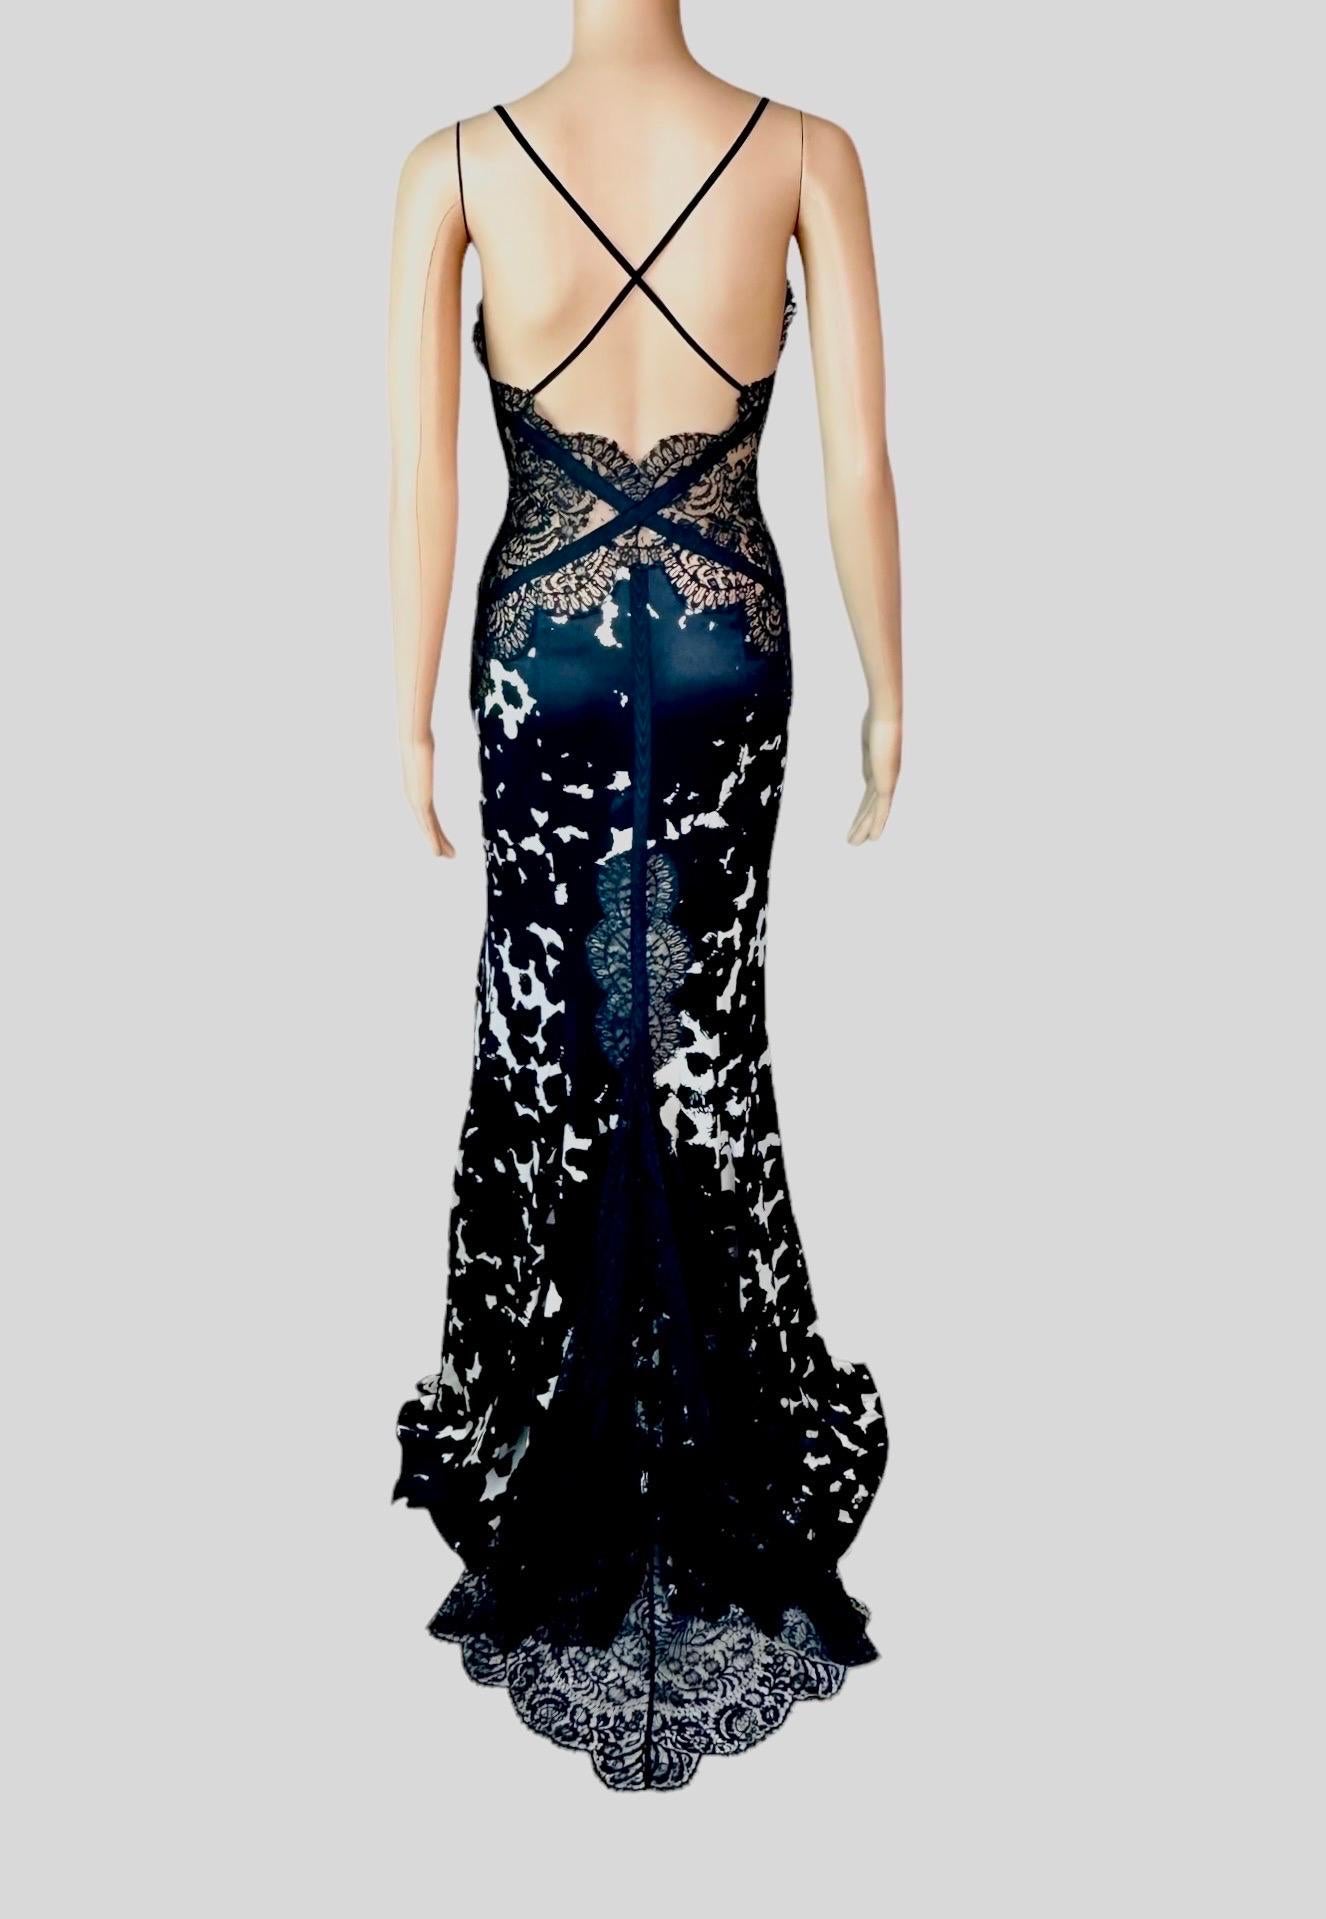 Versace Plunged Sheer Lace Panels Backless Train Evening Dress Gown  2